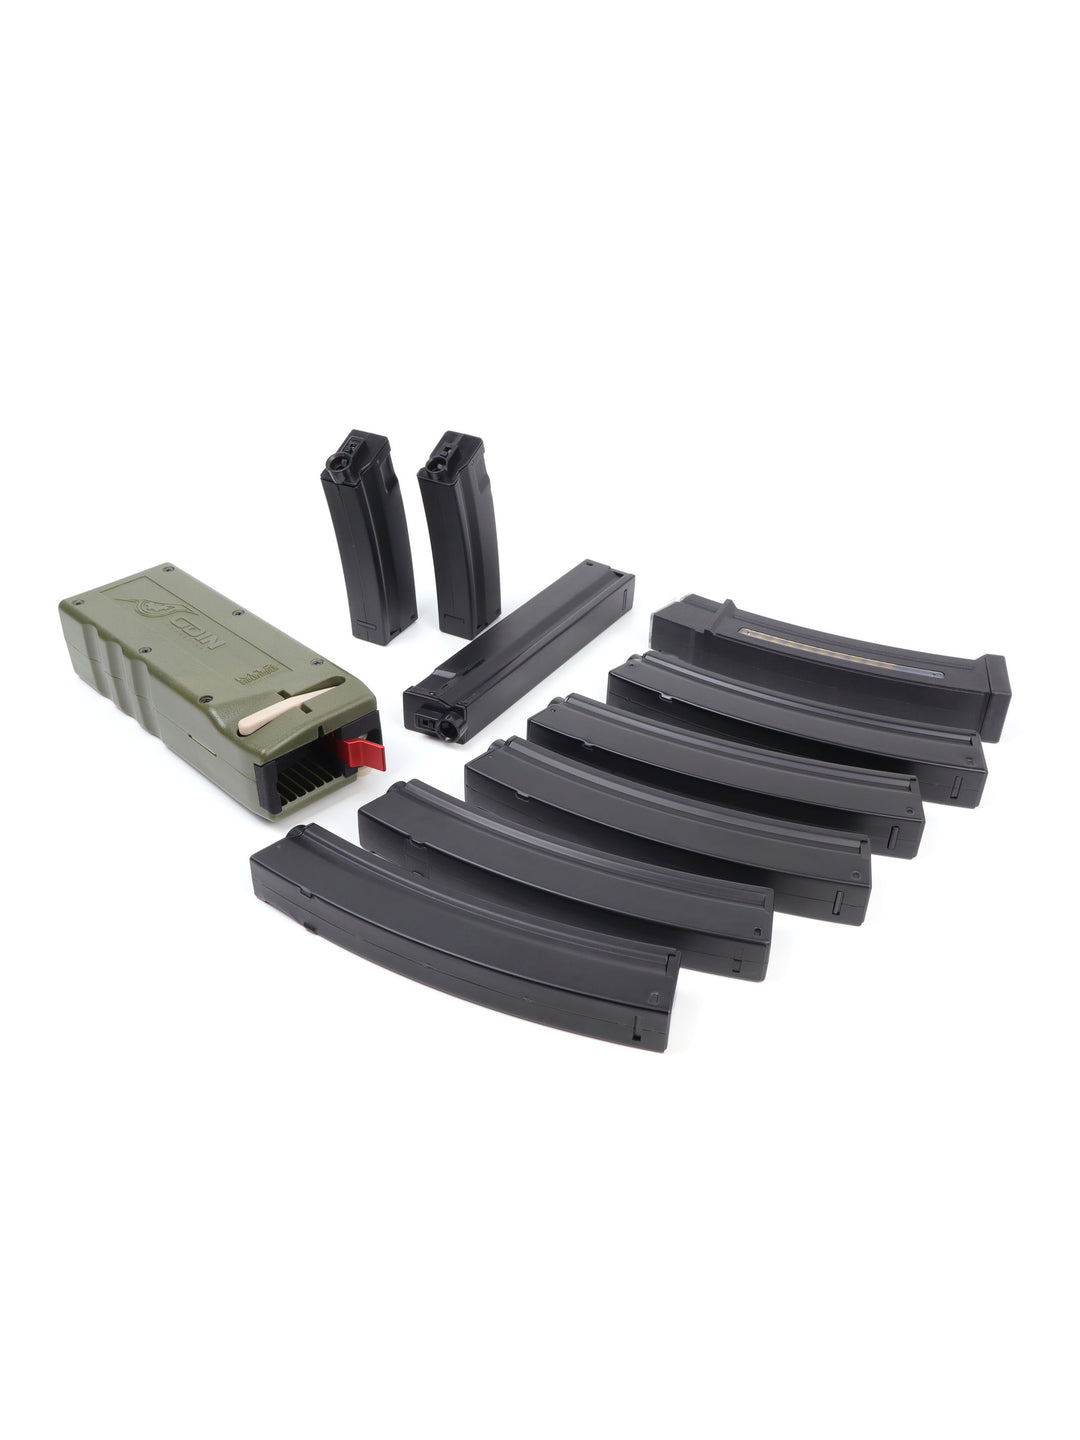 ODIN Adapter for MP5 Magazines